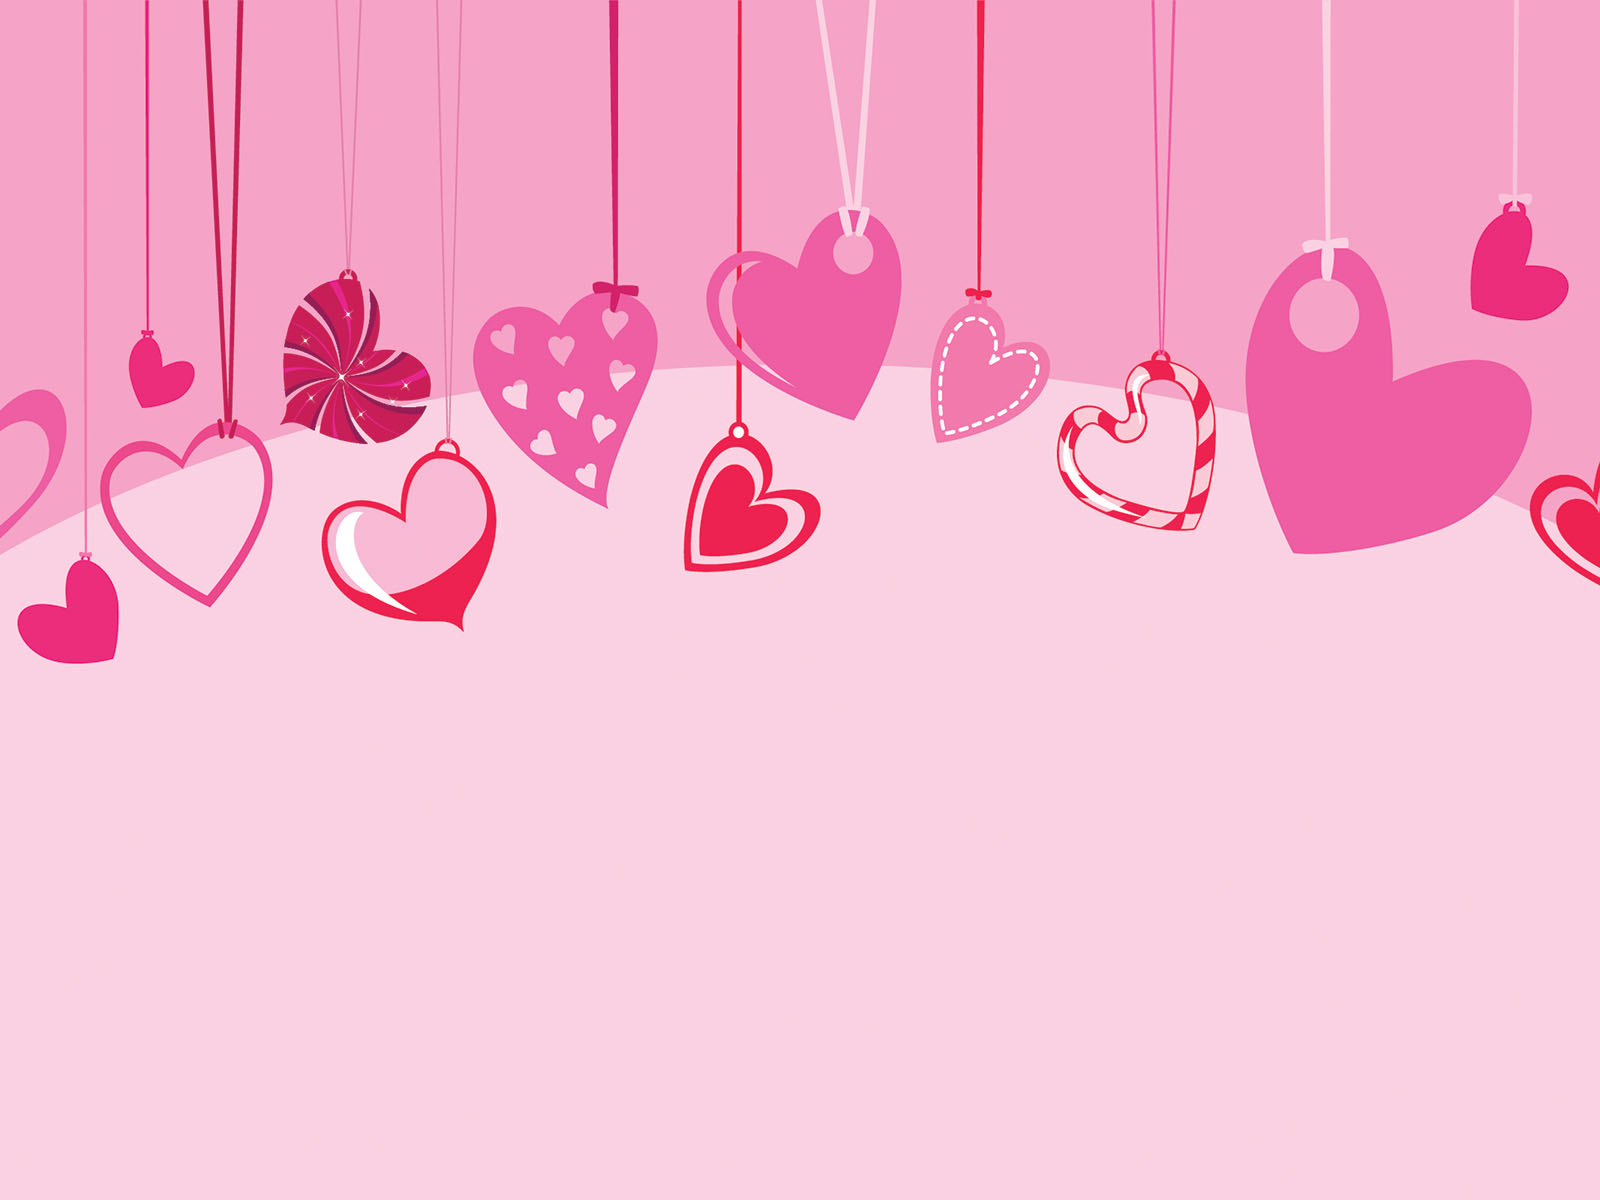 Cute Hearts are Hanging Powerpoint Templates Love Free PPT